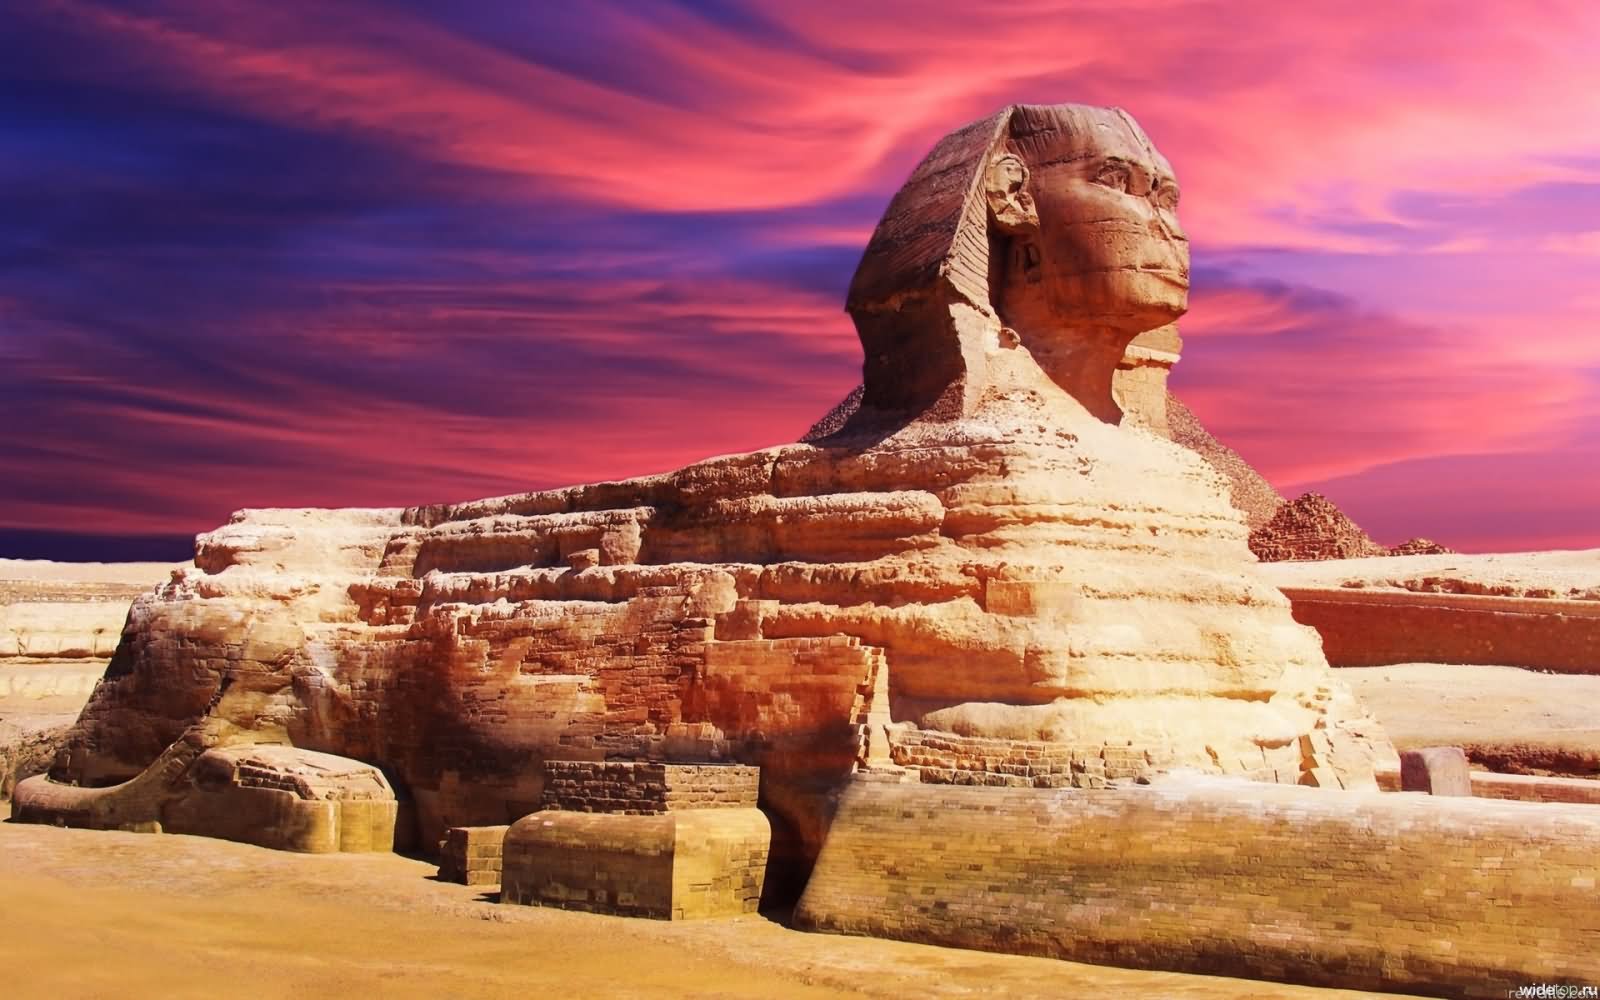 Adorable Sunset View Of The Great Sphinx of Giza